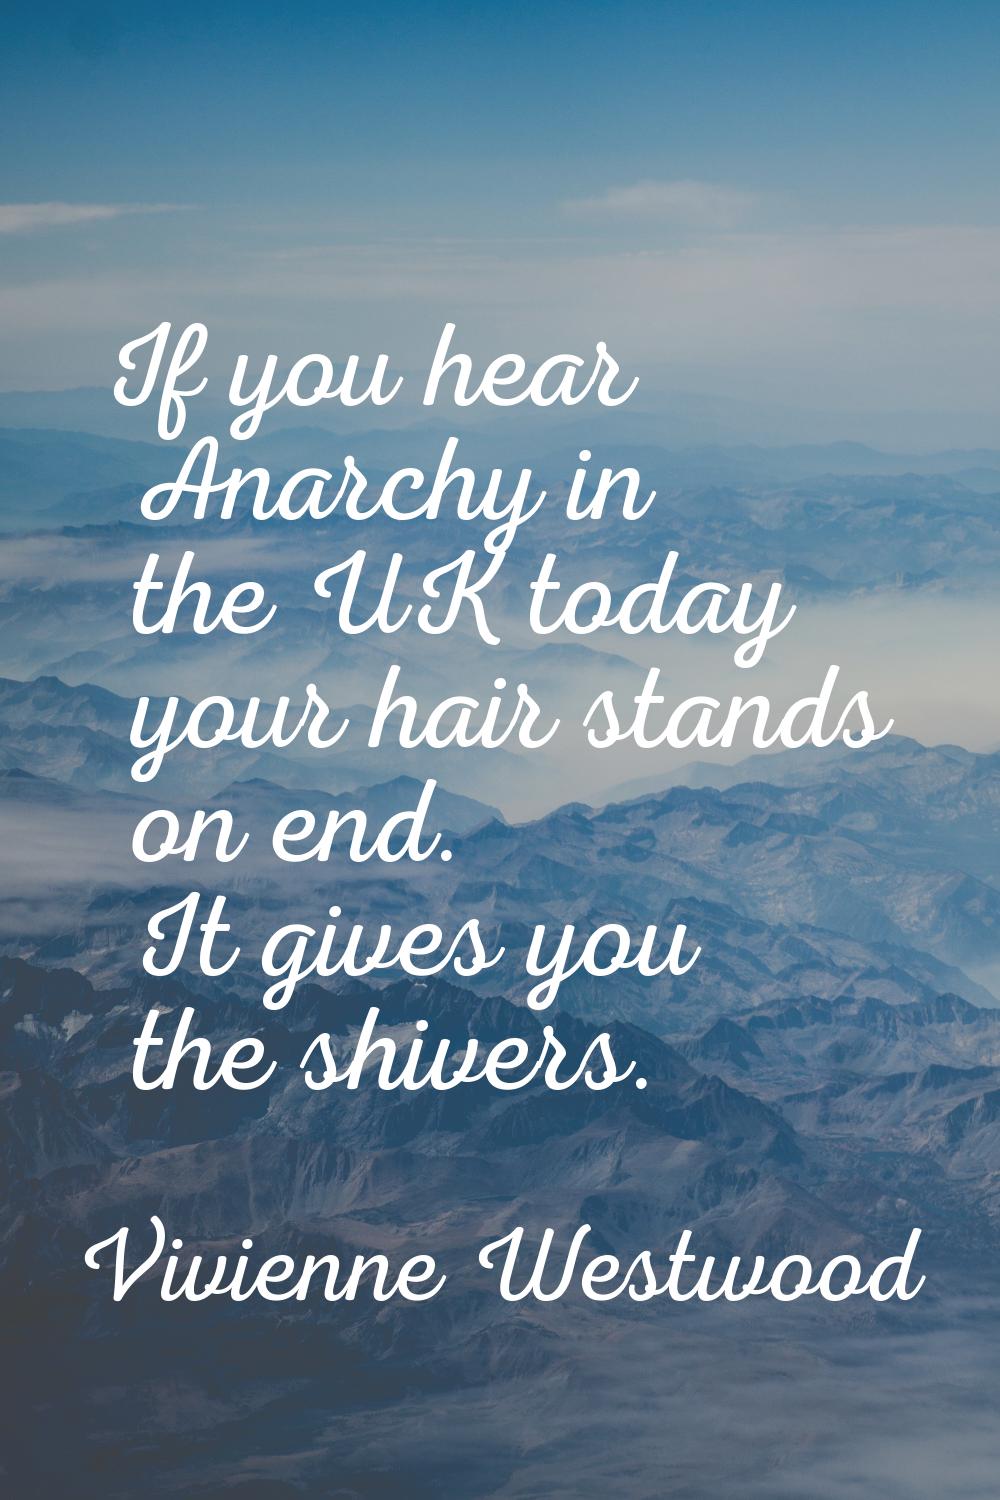 If you hear Anarchy in the UK today your hair stands on end. It gives you the shivers.